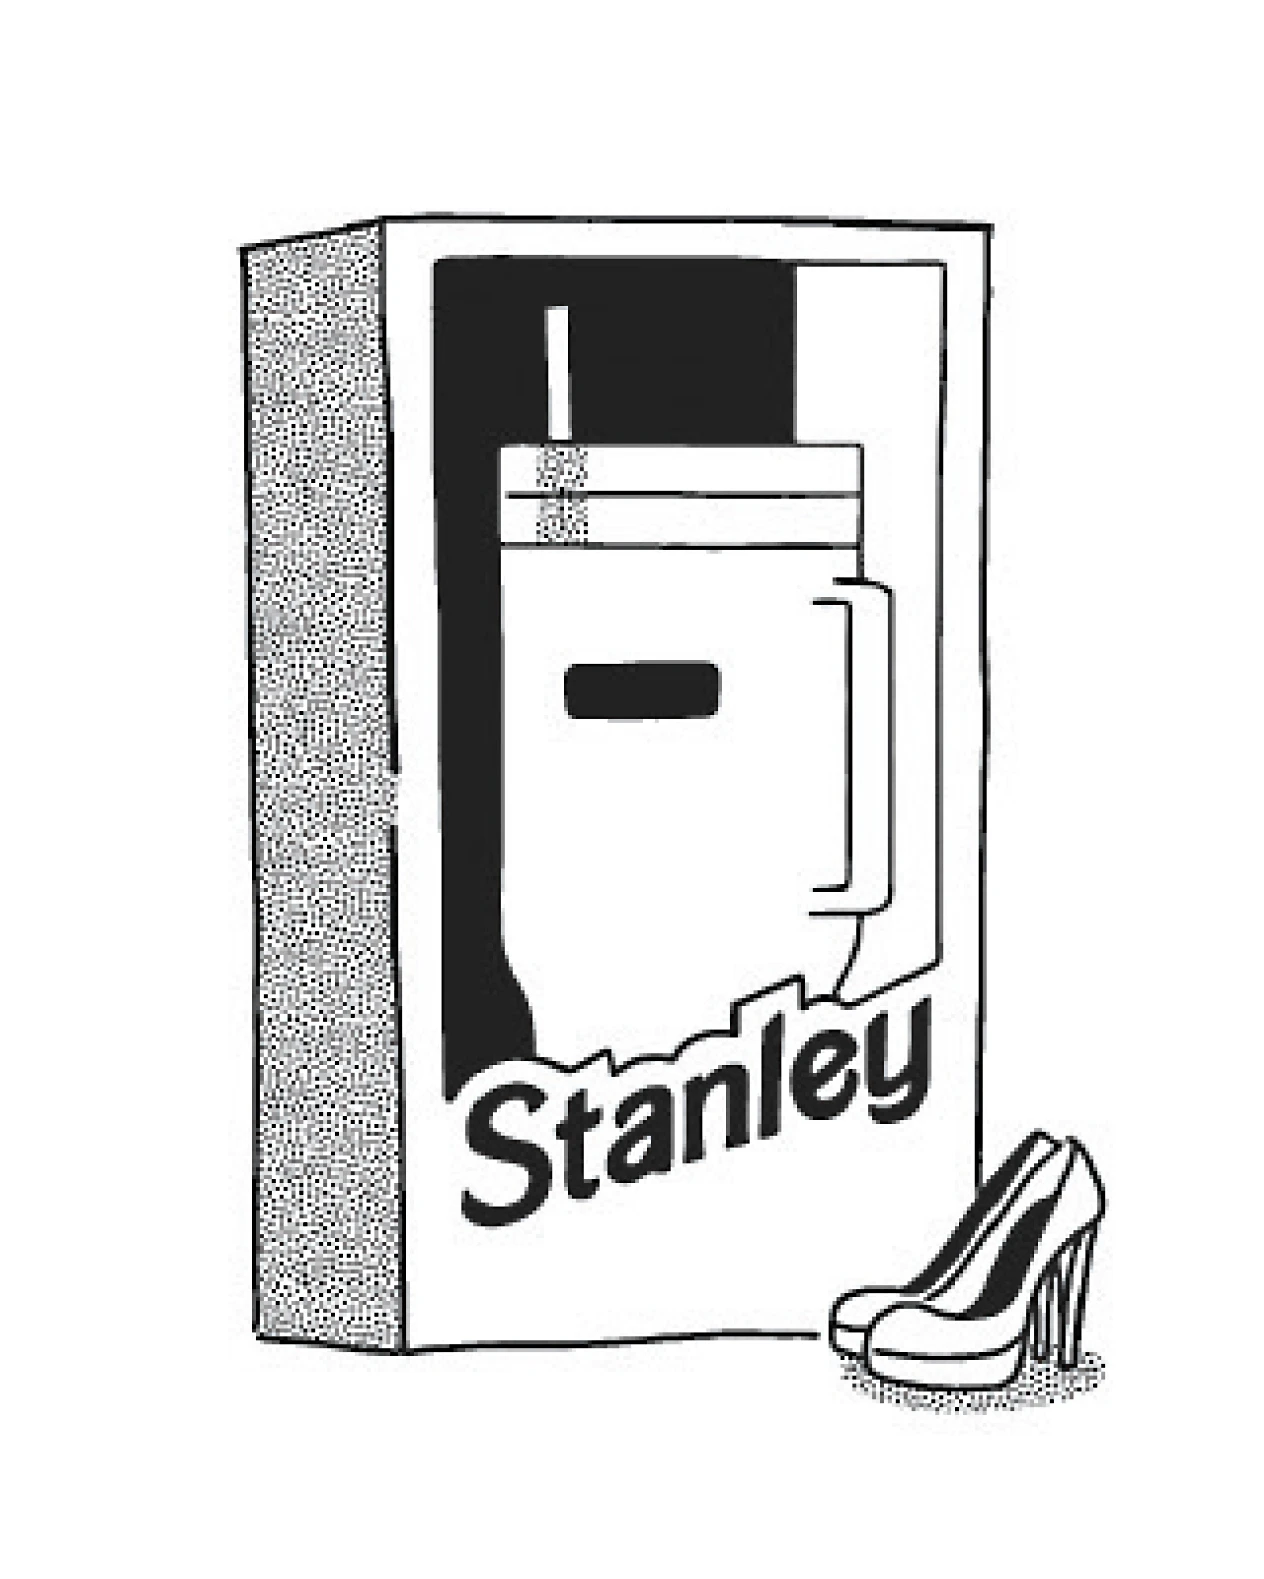 https://images.fastcompany.net/image/upload/wp-cms/uploads/2023/10/p-1-90957921-stanley-quencher-pop-culture-1.webp